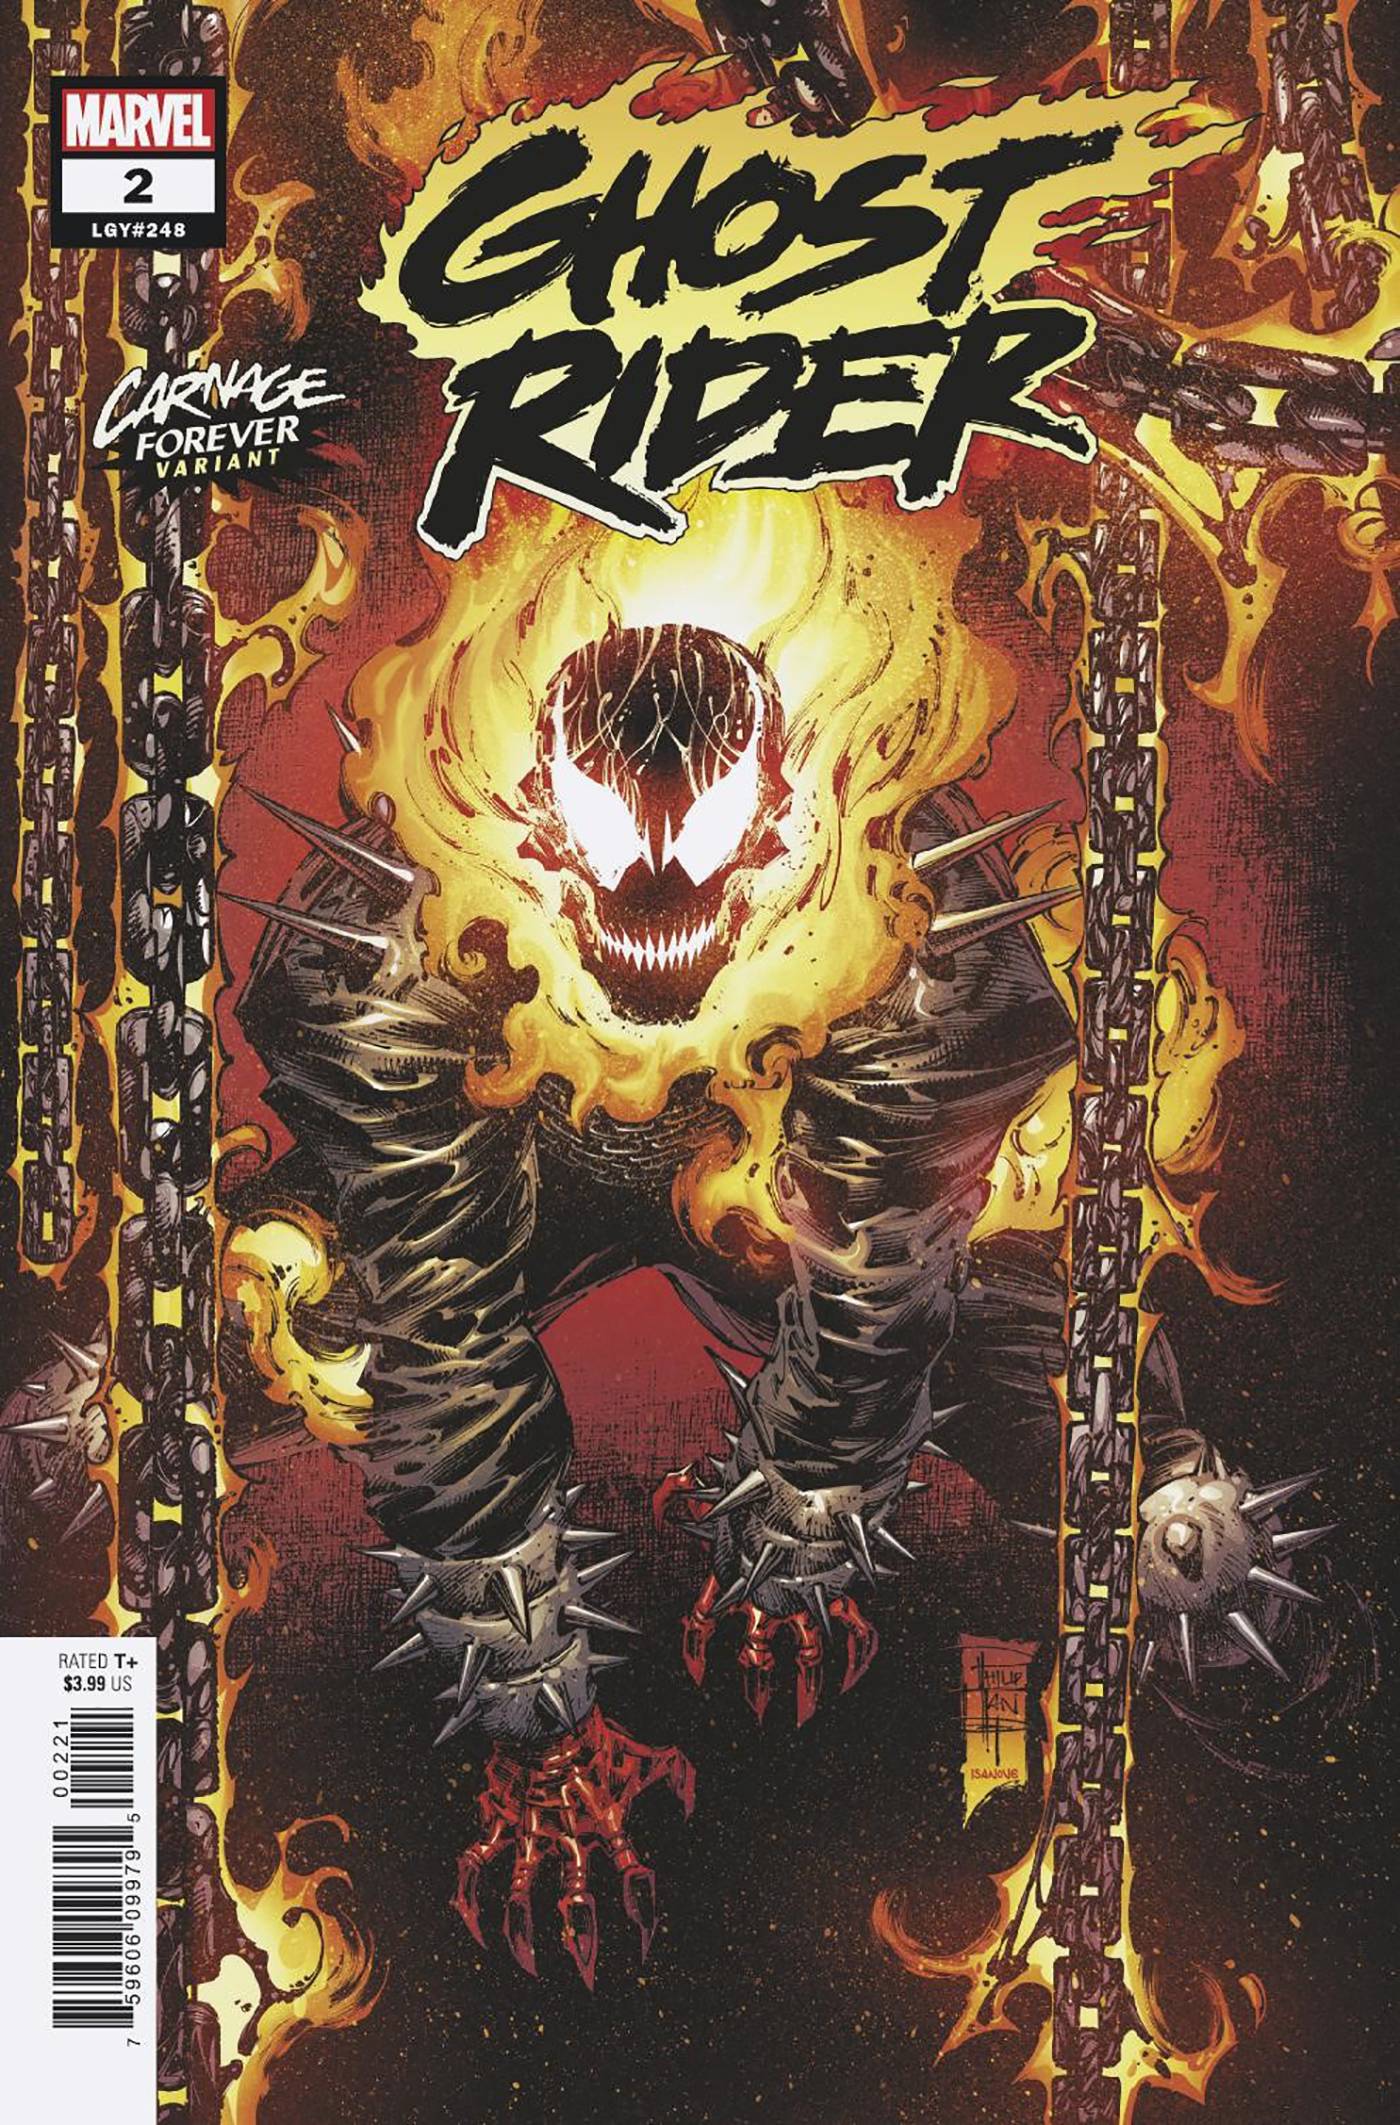 03/30/2022 GHOST RIDER #2 TAN CARNAGE FOREVER VARIANT